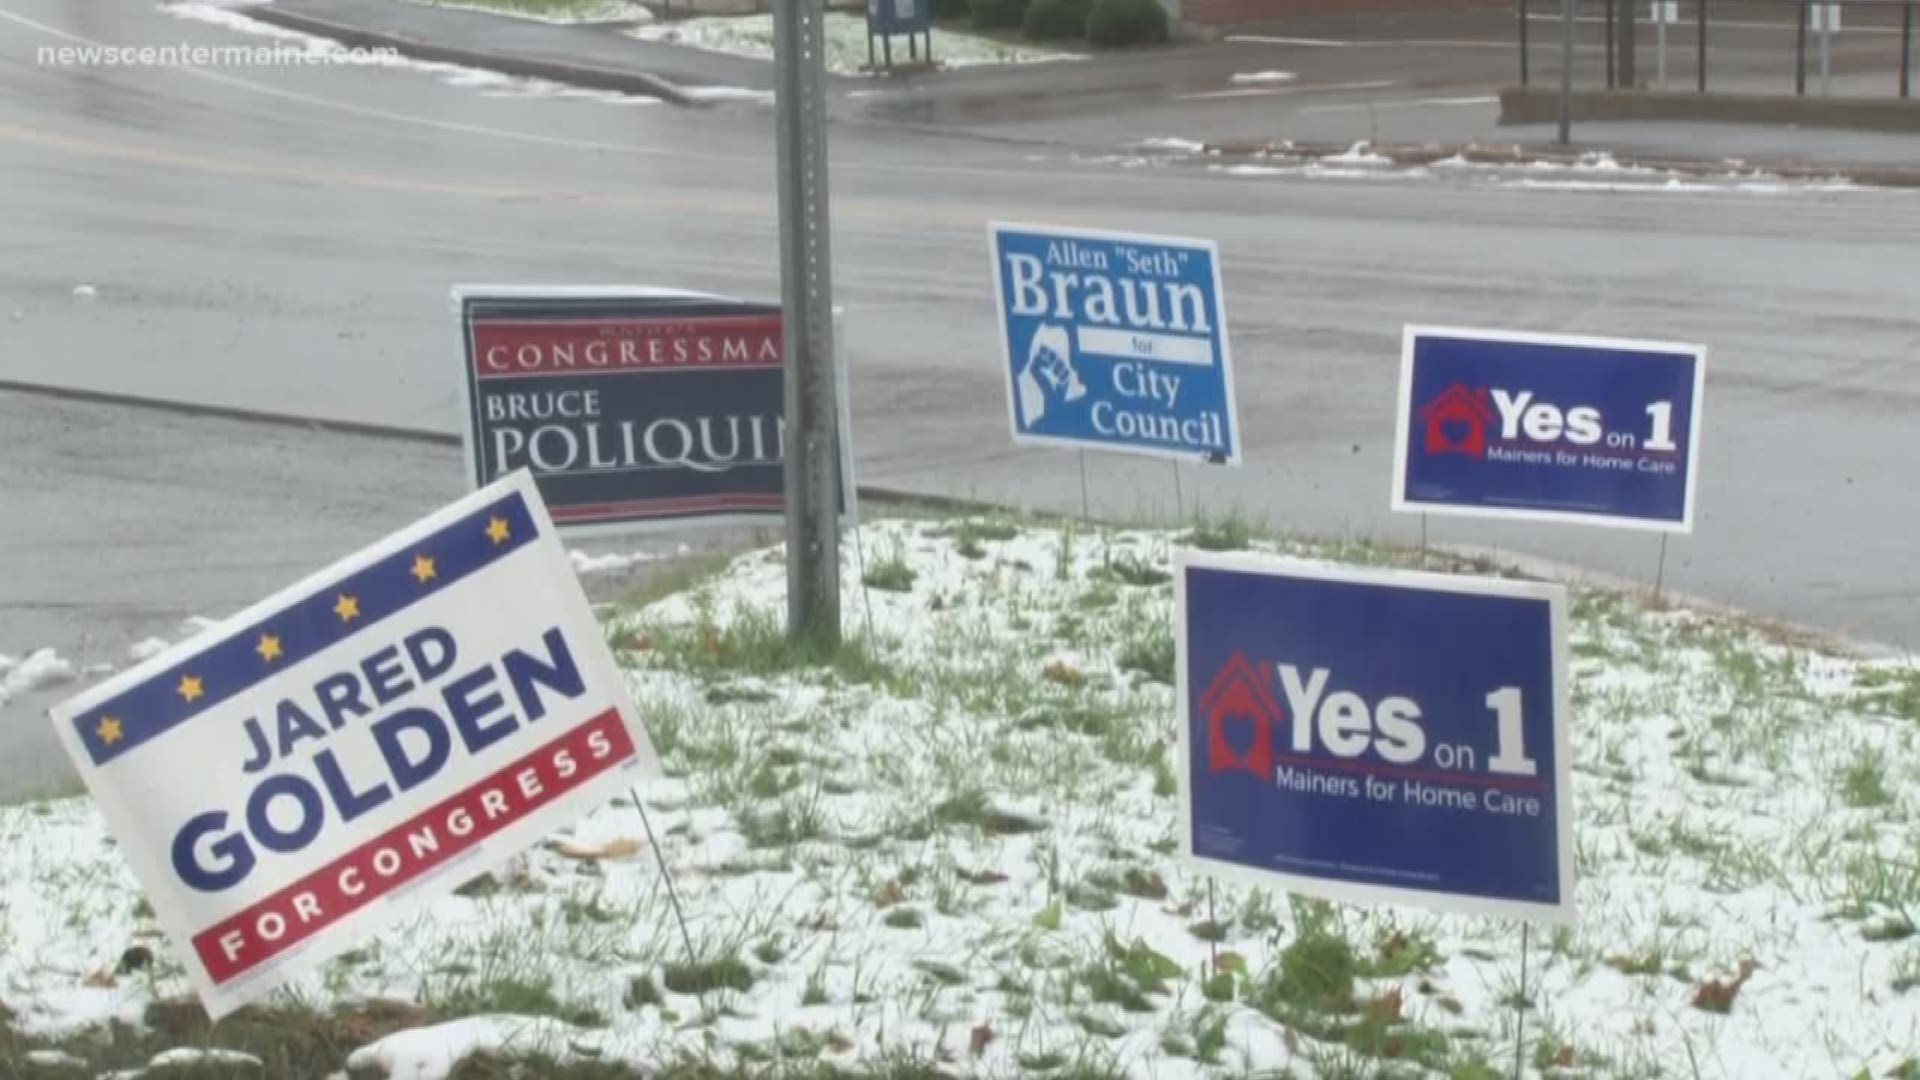 Campaign signs can stay up longer than years past.